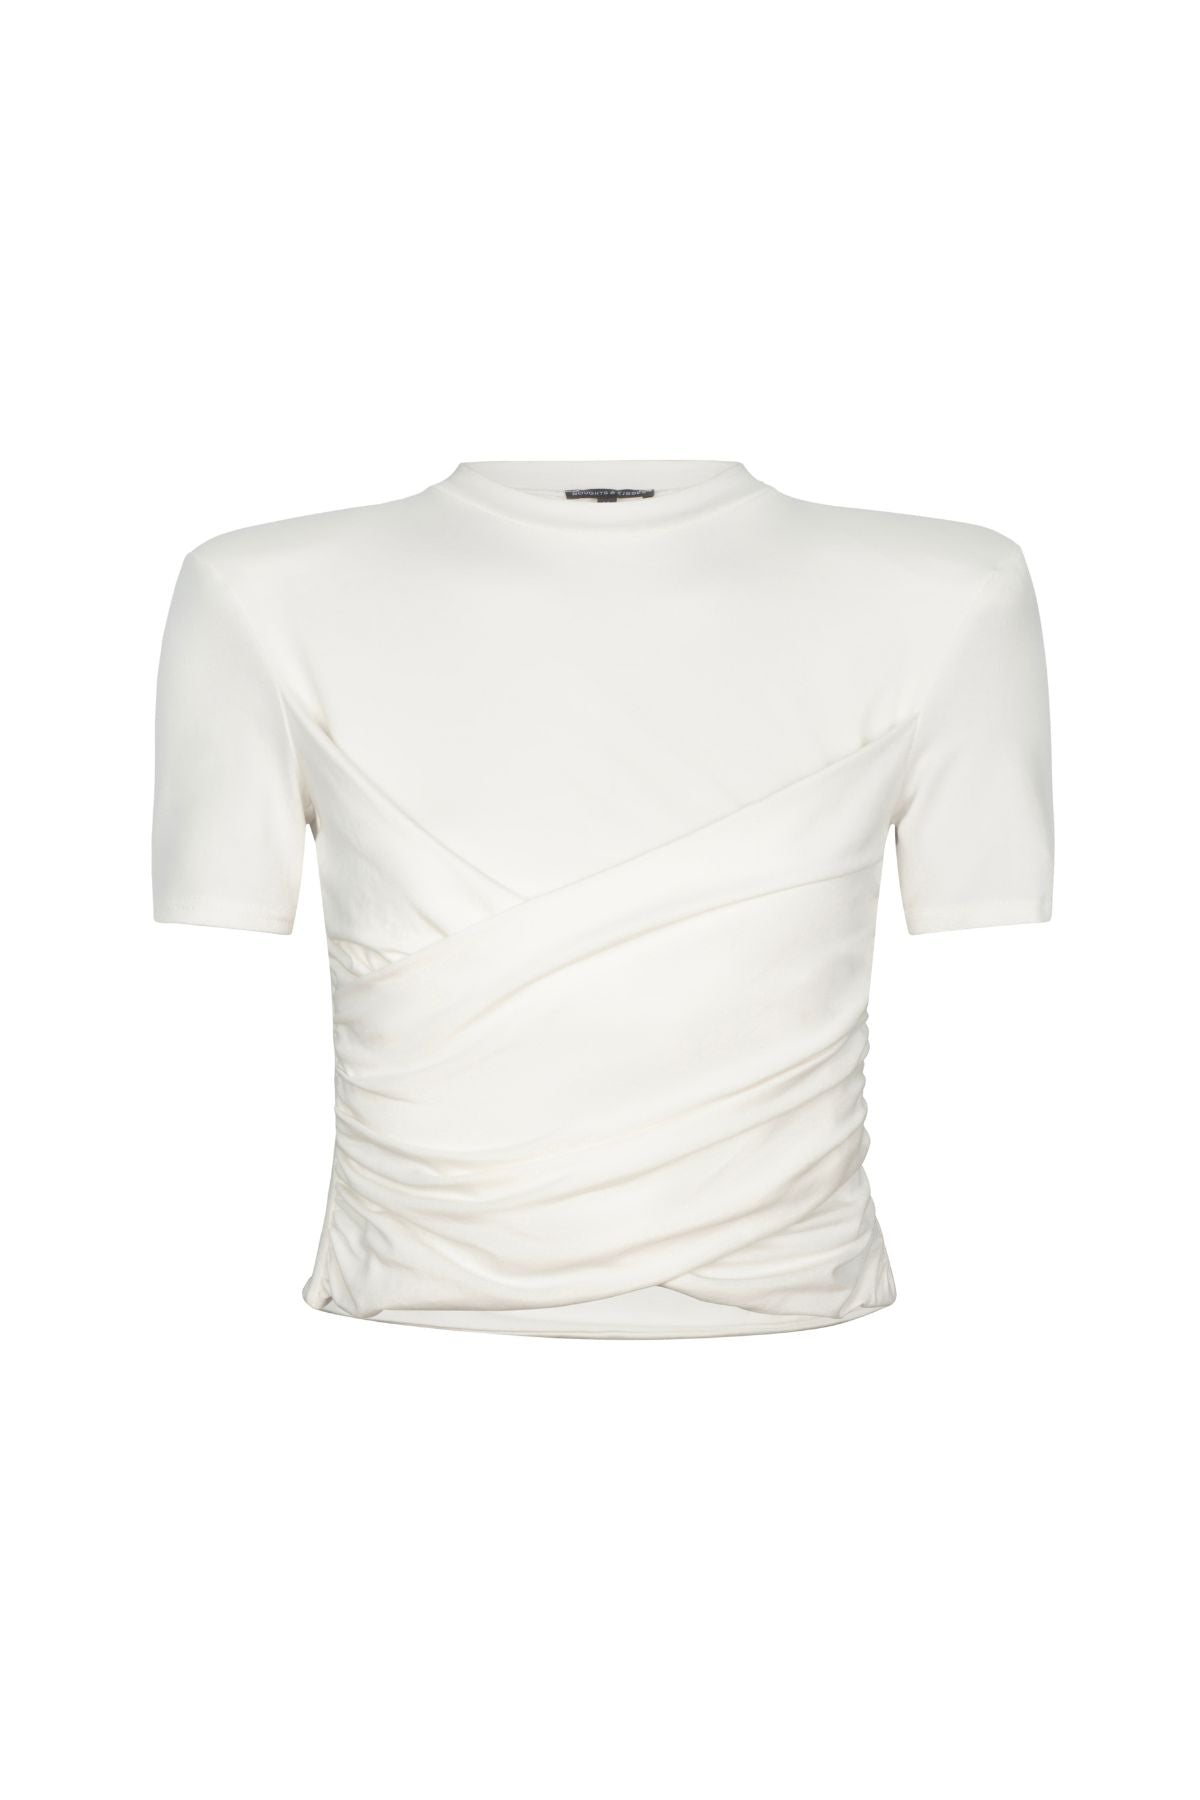 TALIA Off White Cropped Shoulder Pad T-Shirt